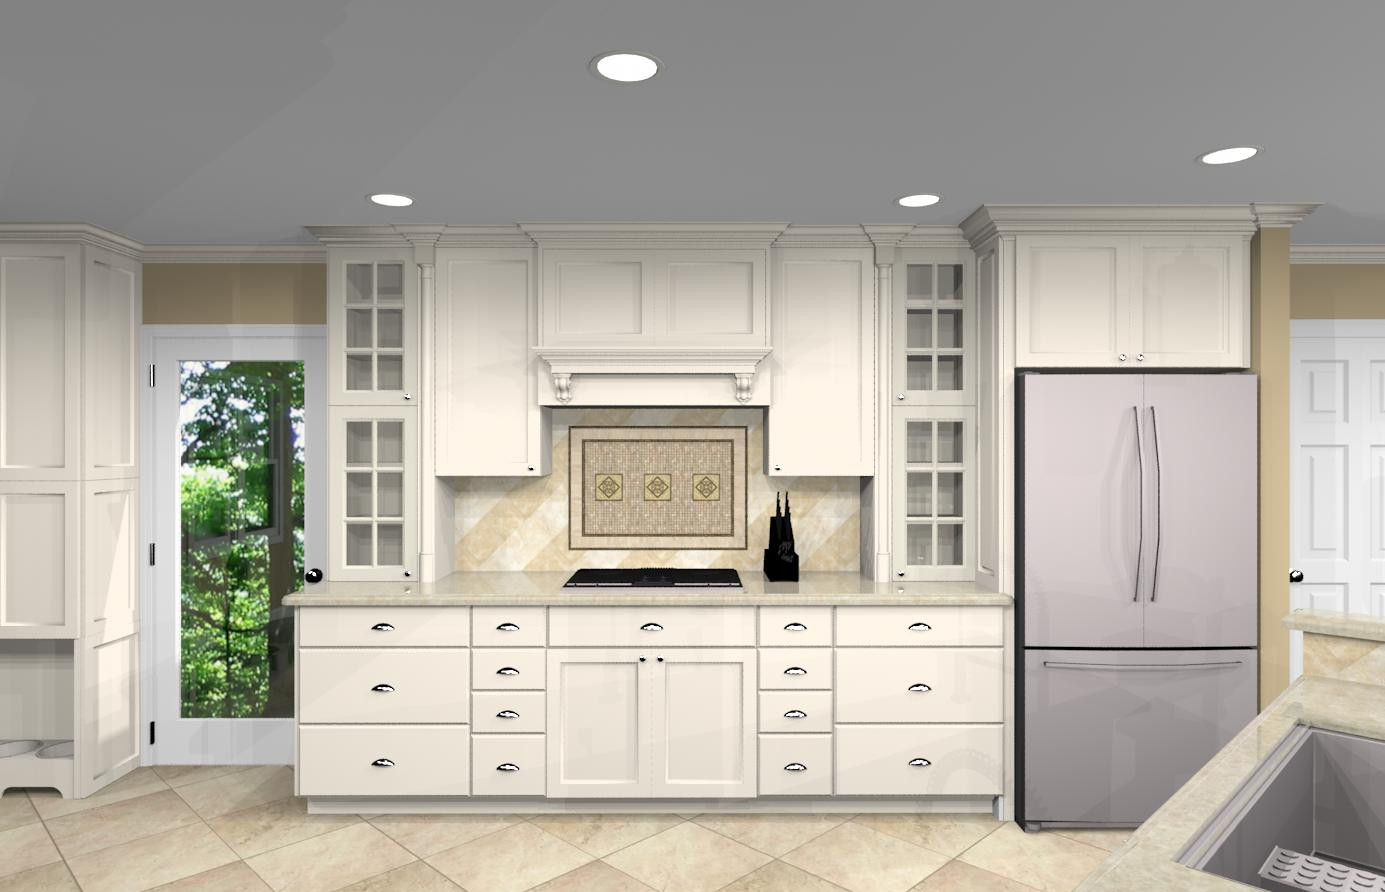 Kitchen Remodel Planning
 Kitchen Remodeling Design with Open Floor Plan in Watchung